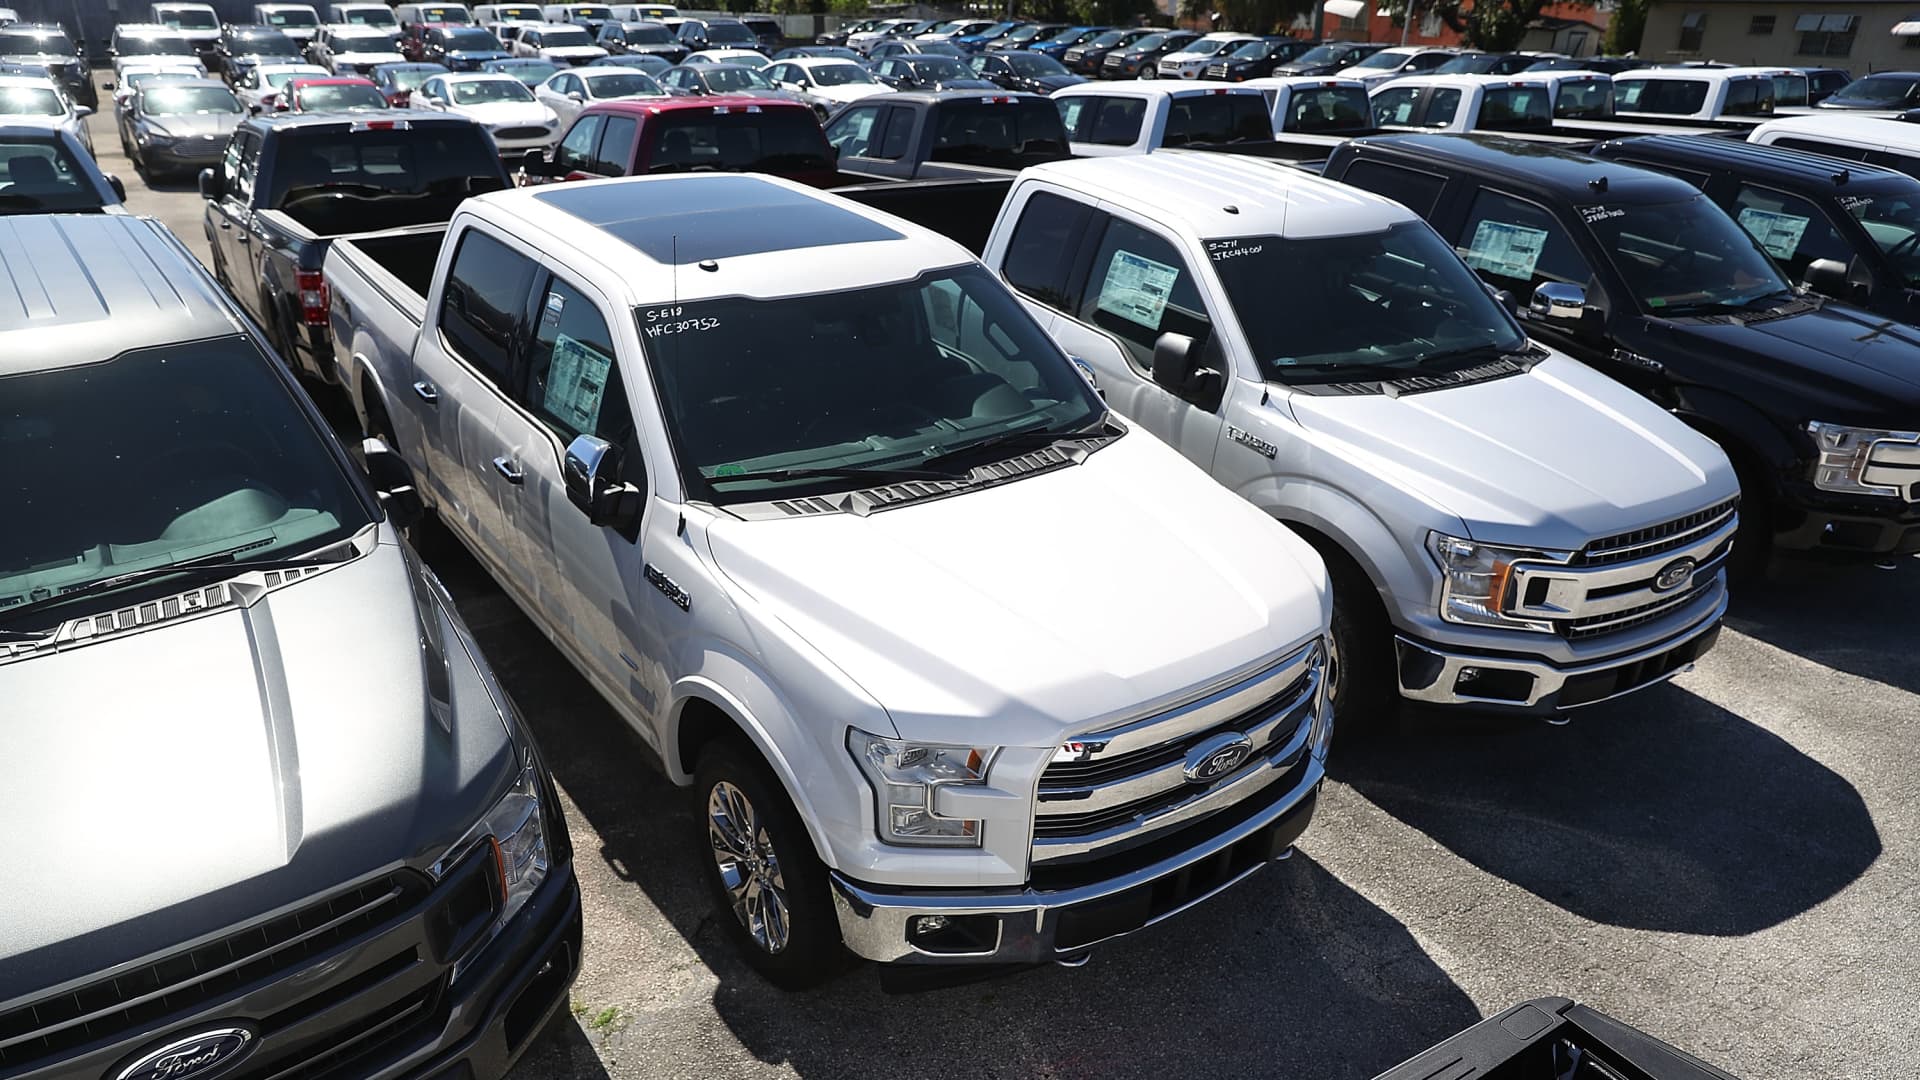 Ford new vehicle sales up in Q3, led by pickup trucks